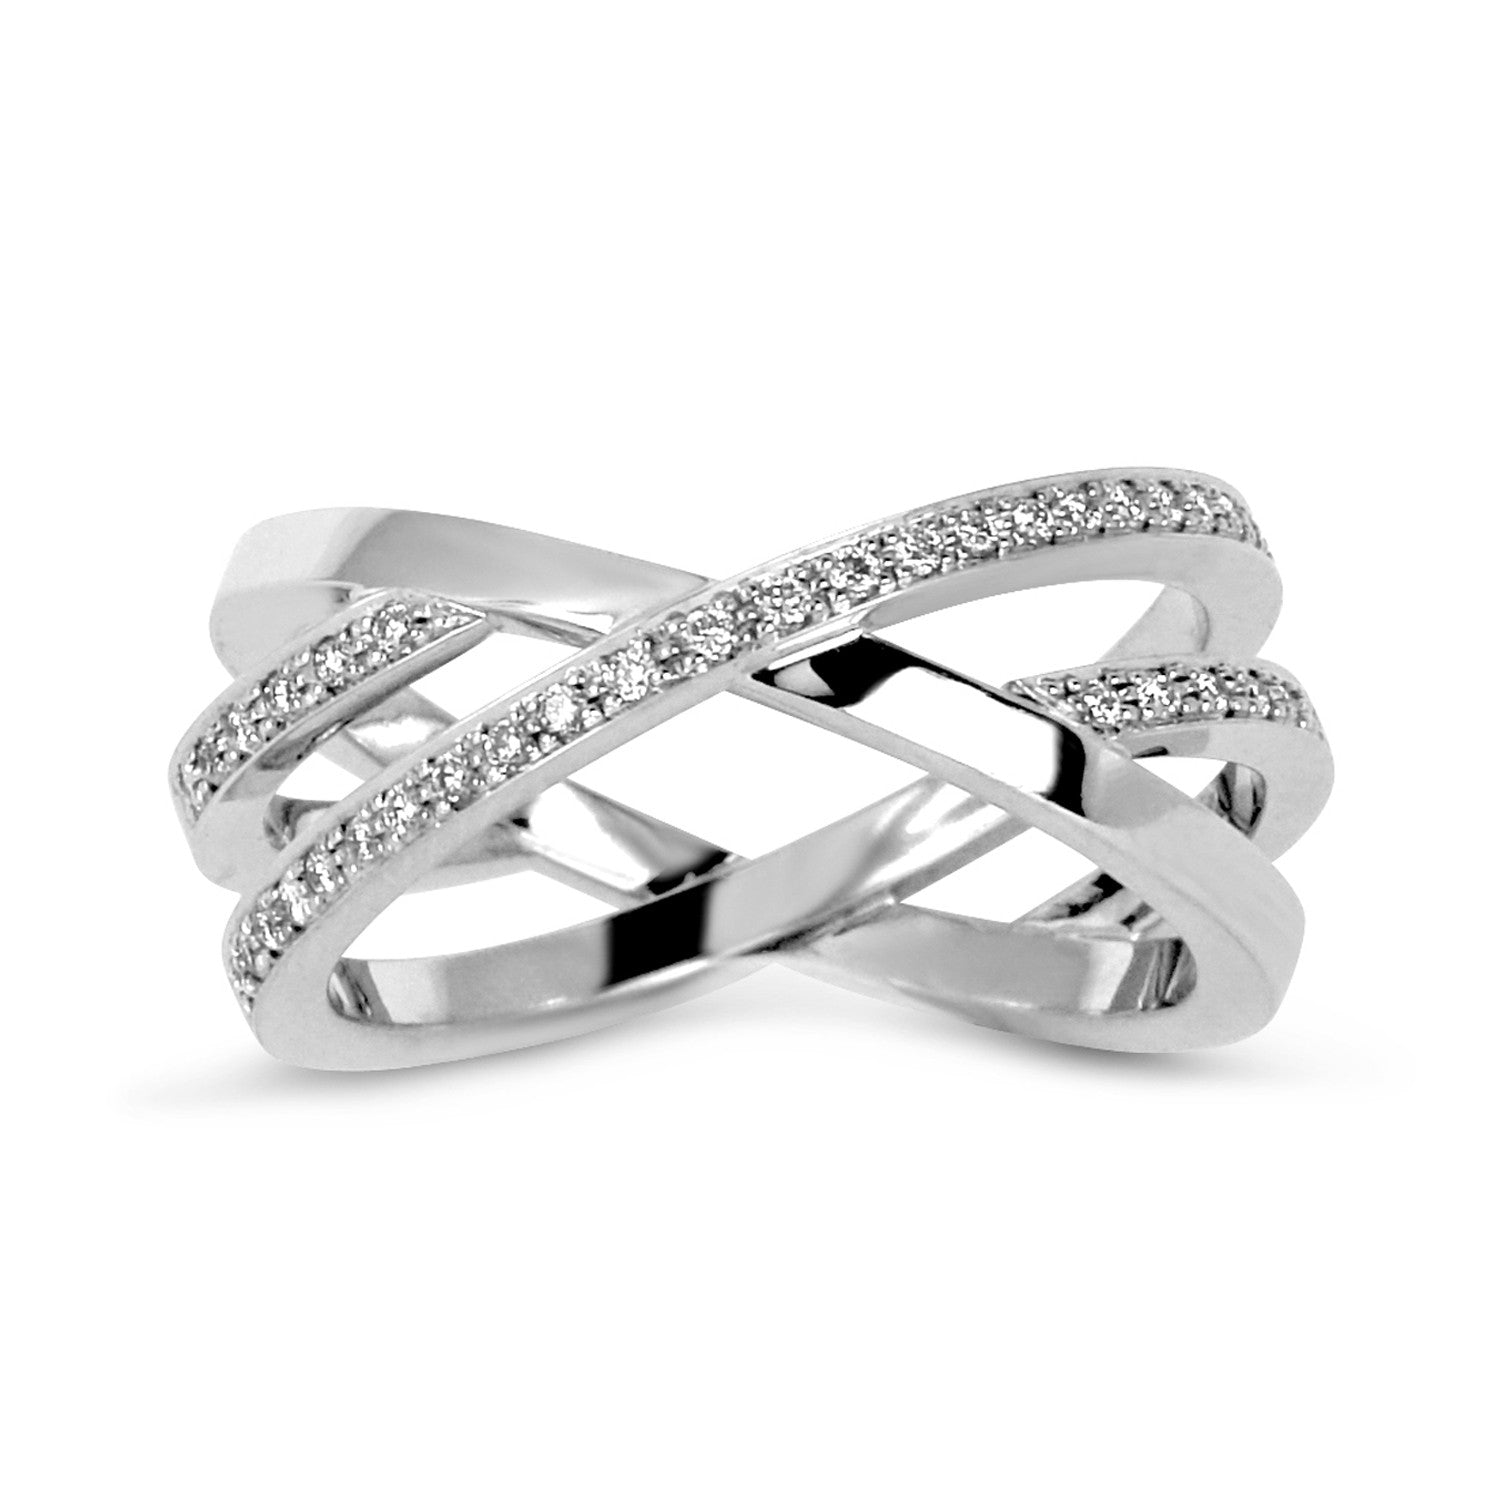 Bespoke Cross ring - 18ct recycled white gold and conflict-free diamonds